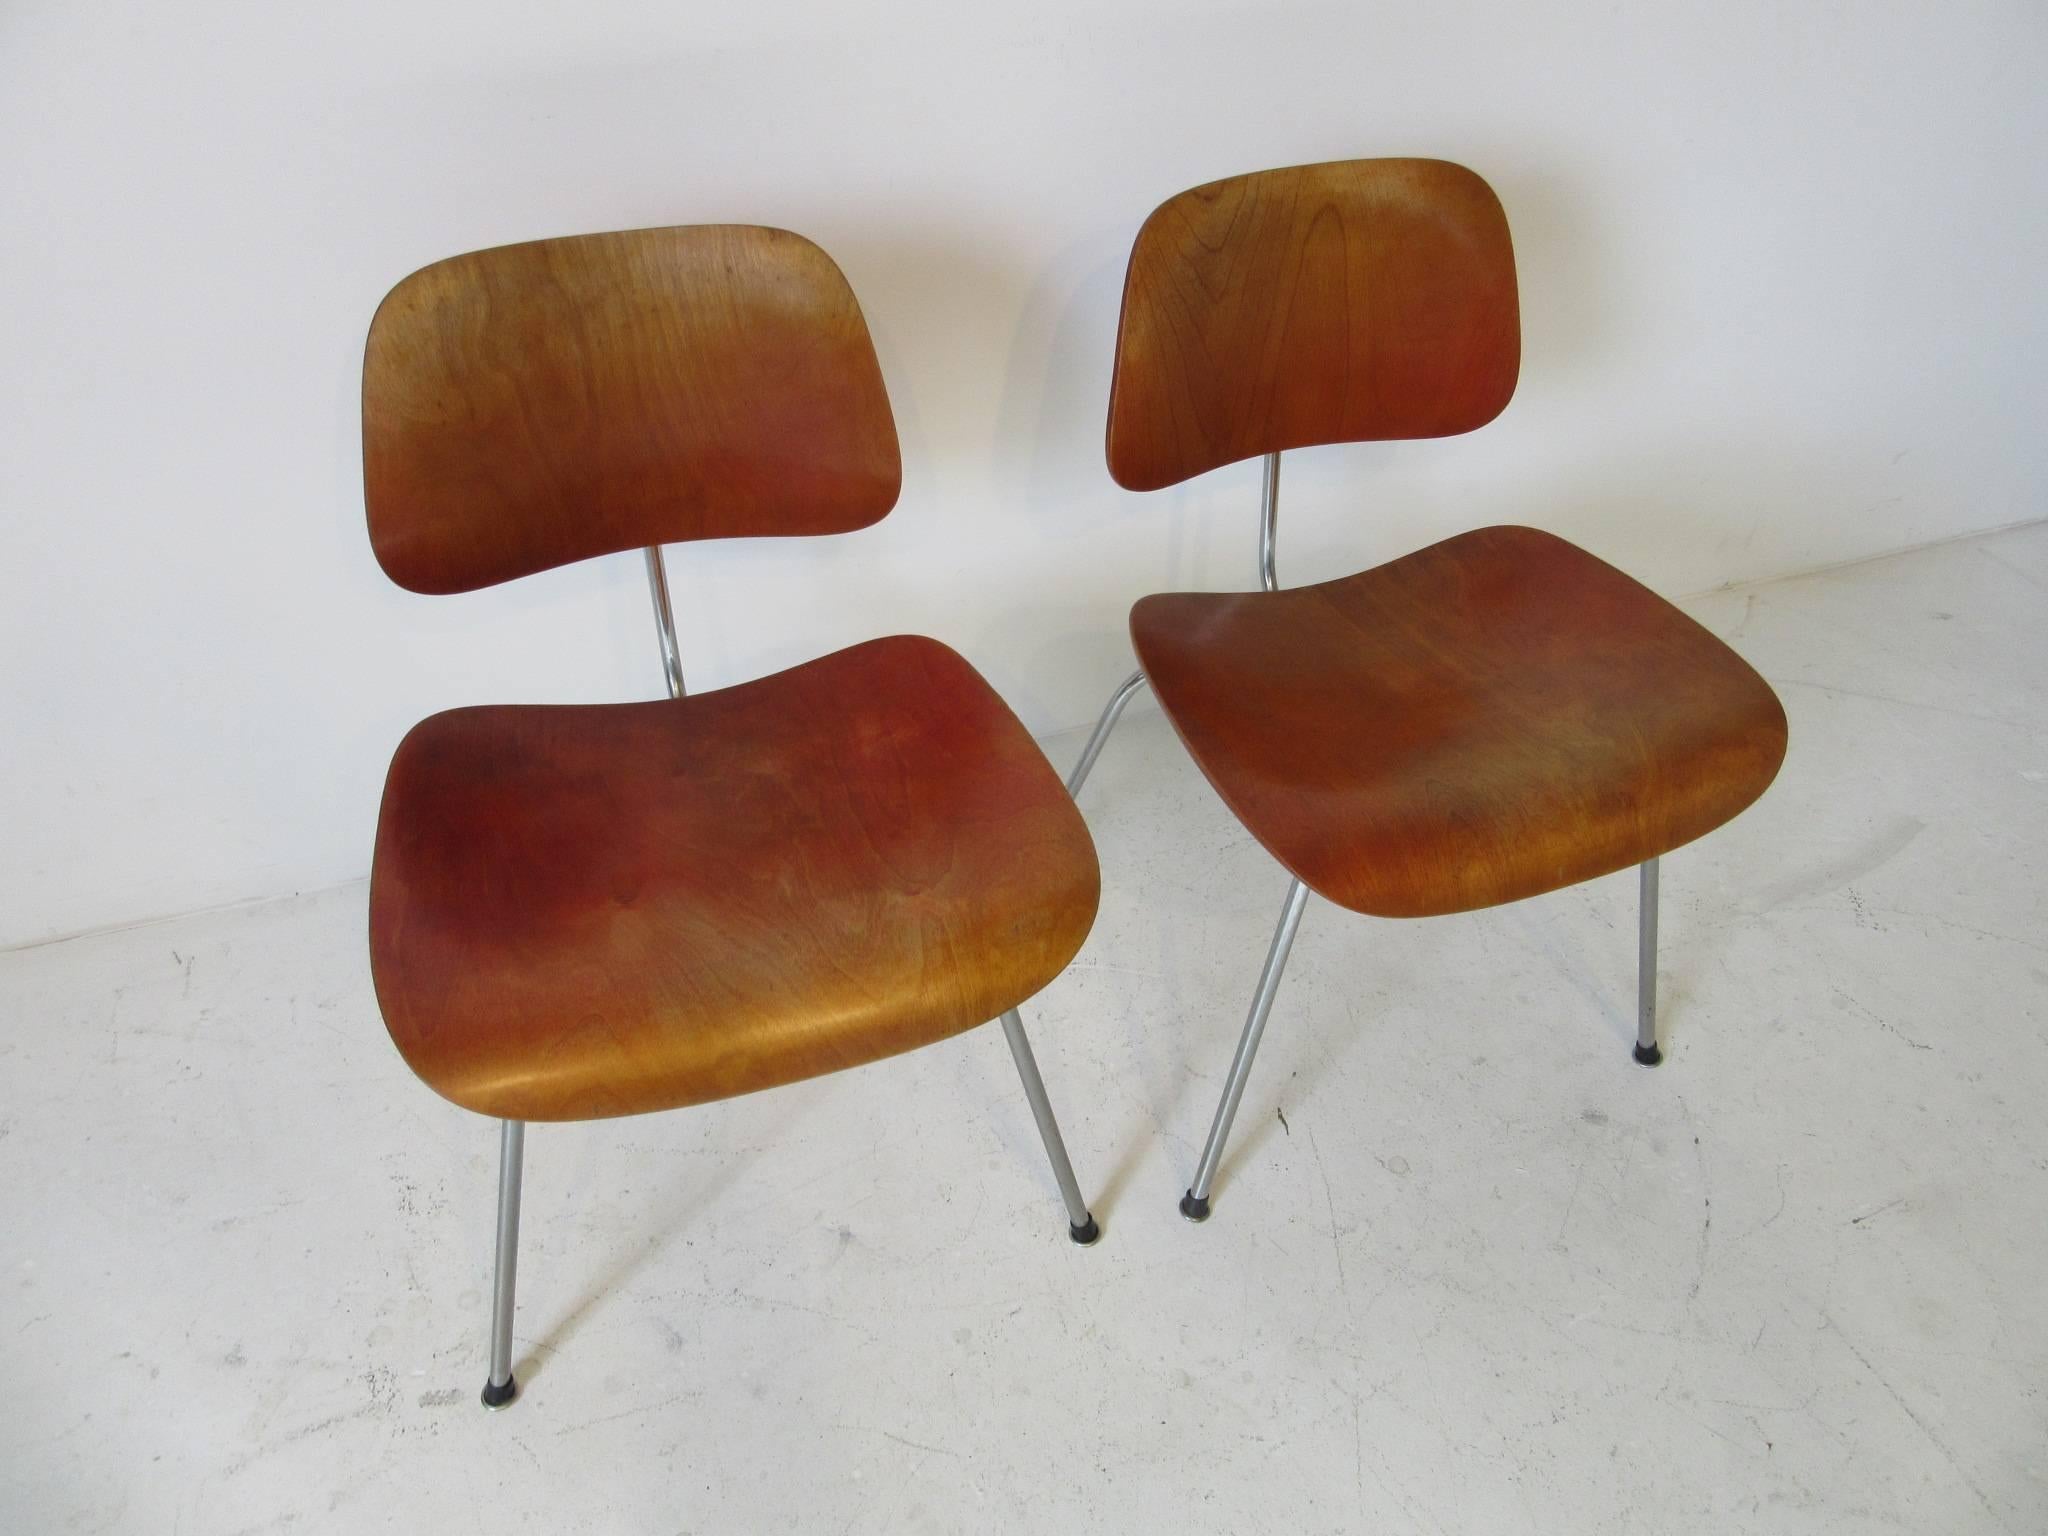 Eames Red Aniline Dyed DCM Chairs by Herman Miller 1